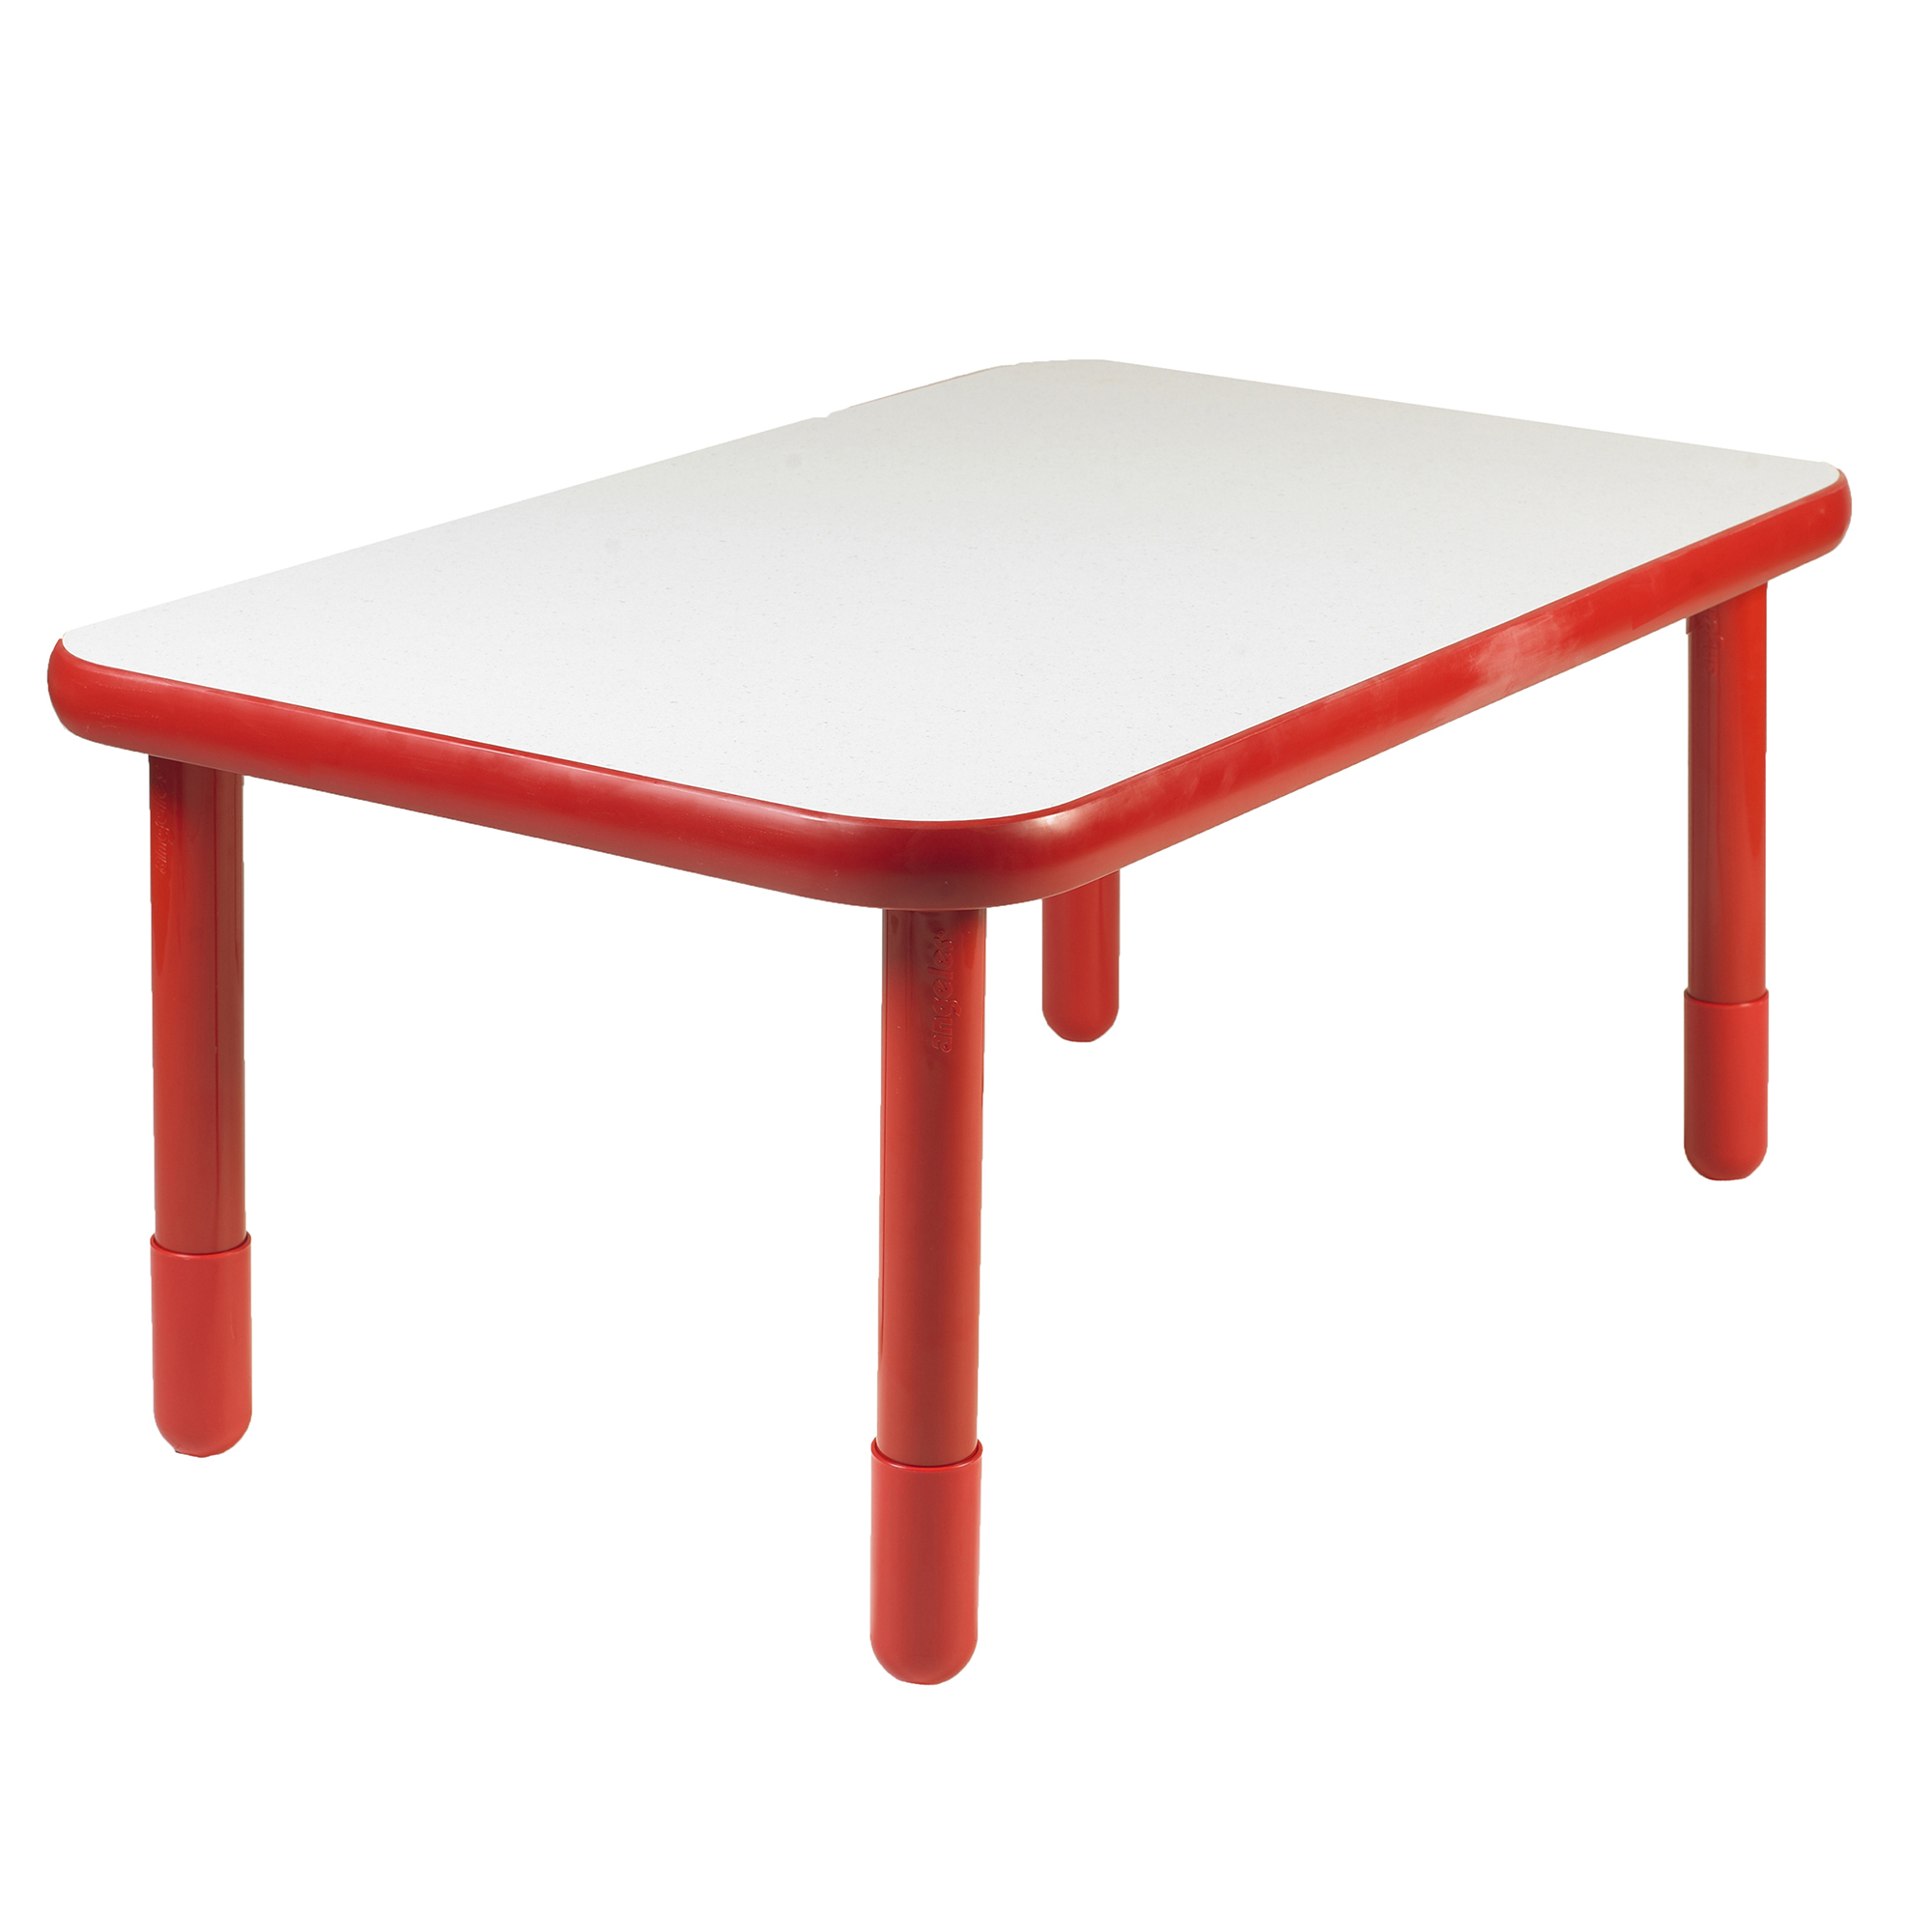 BaseLine® 122 cm  x 76 cm  Rectangular Table - Candy Apple Red with 56 cm  Legs